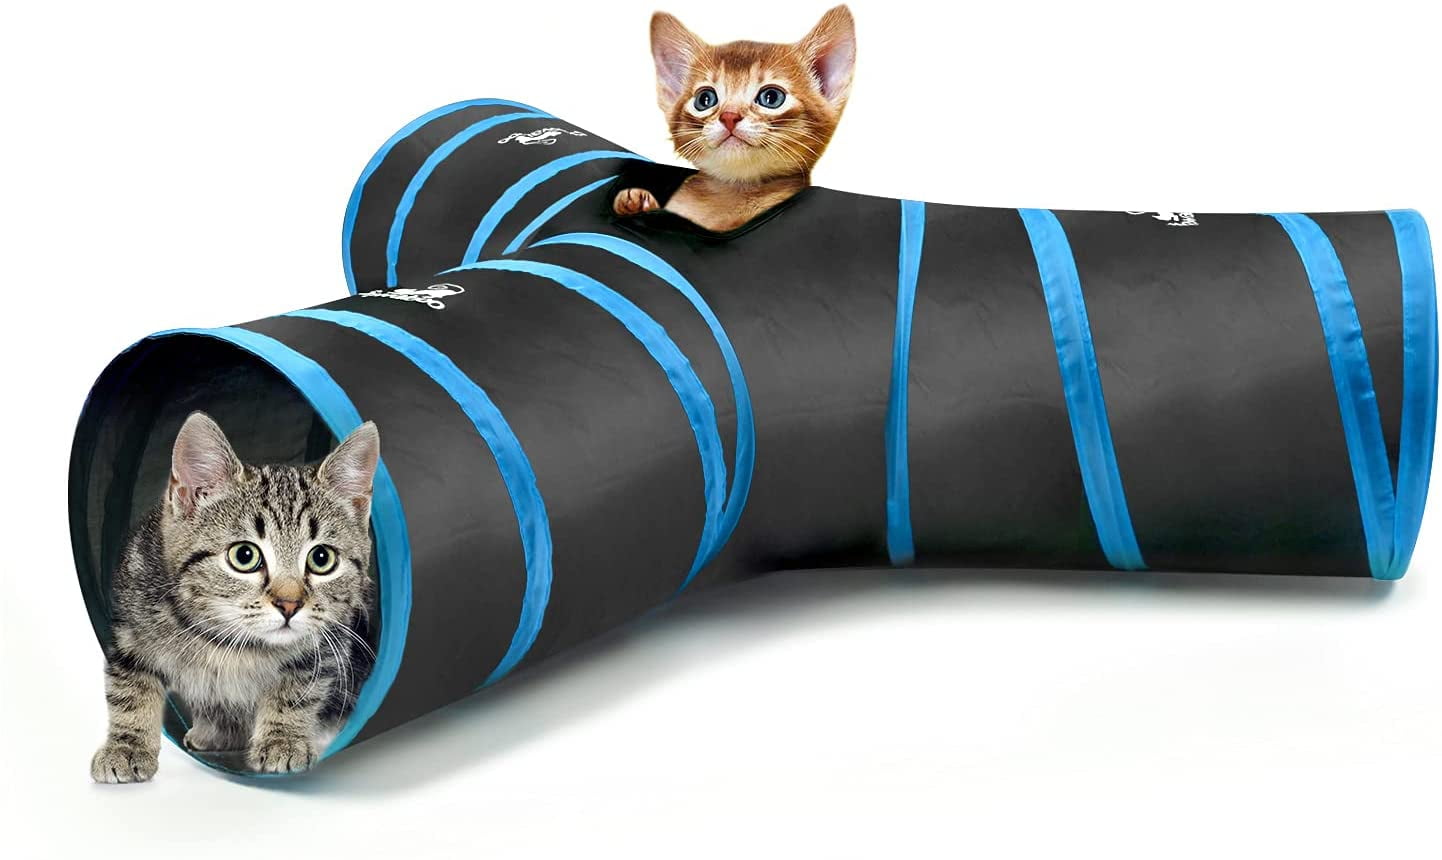 Maze Cat House Fun Cat Tunnel Foldable Kitten Playing Rainbow Tube Indoor Outdoor Kitty Puppy Toys for Puzzle Exercise Hiding Training-Cat Tunnel